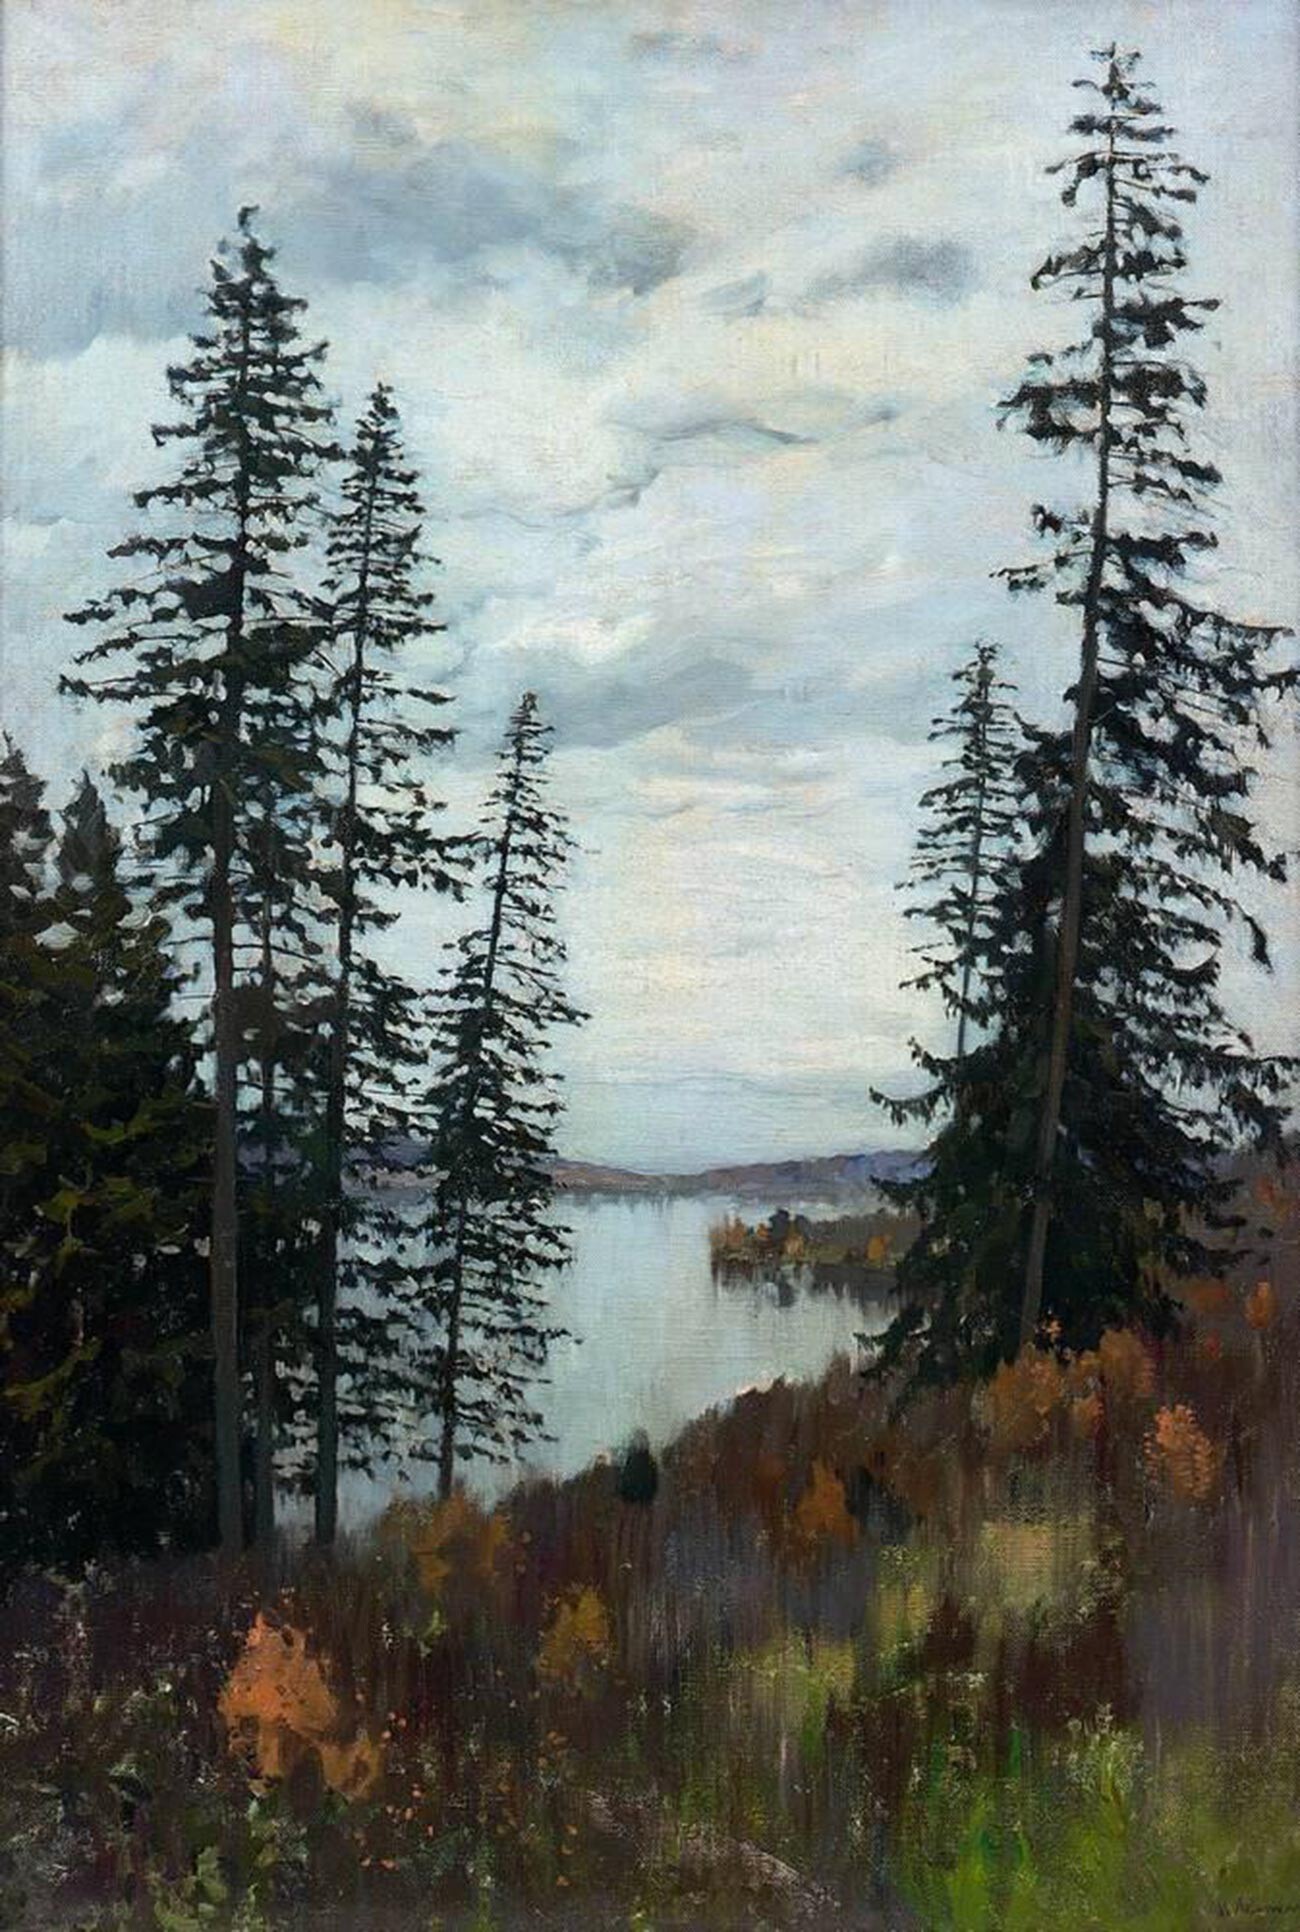 Up to the North, 1896.